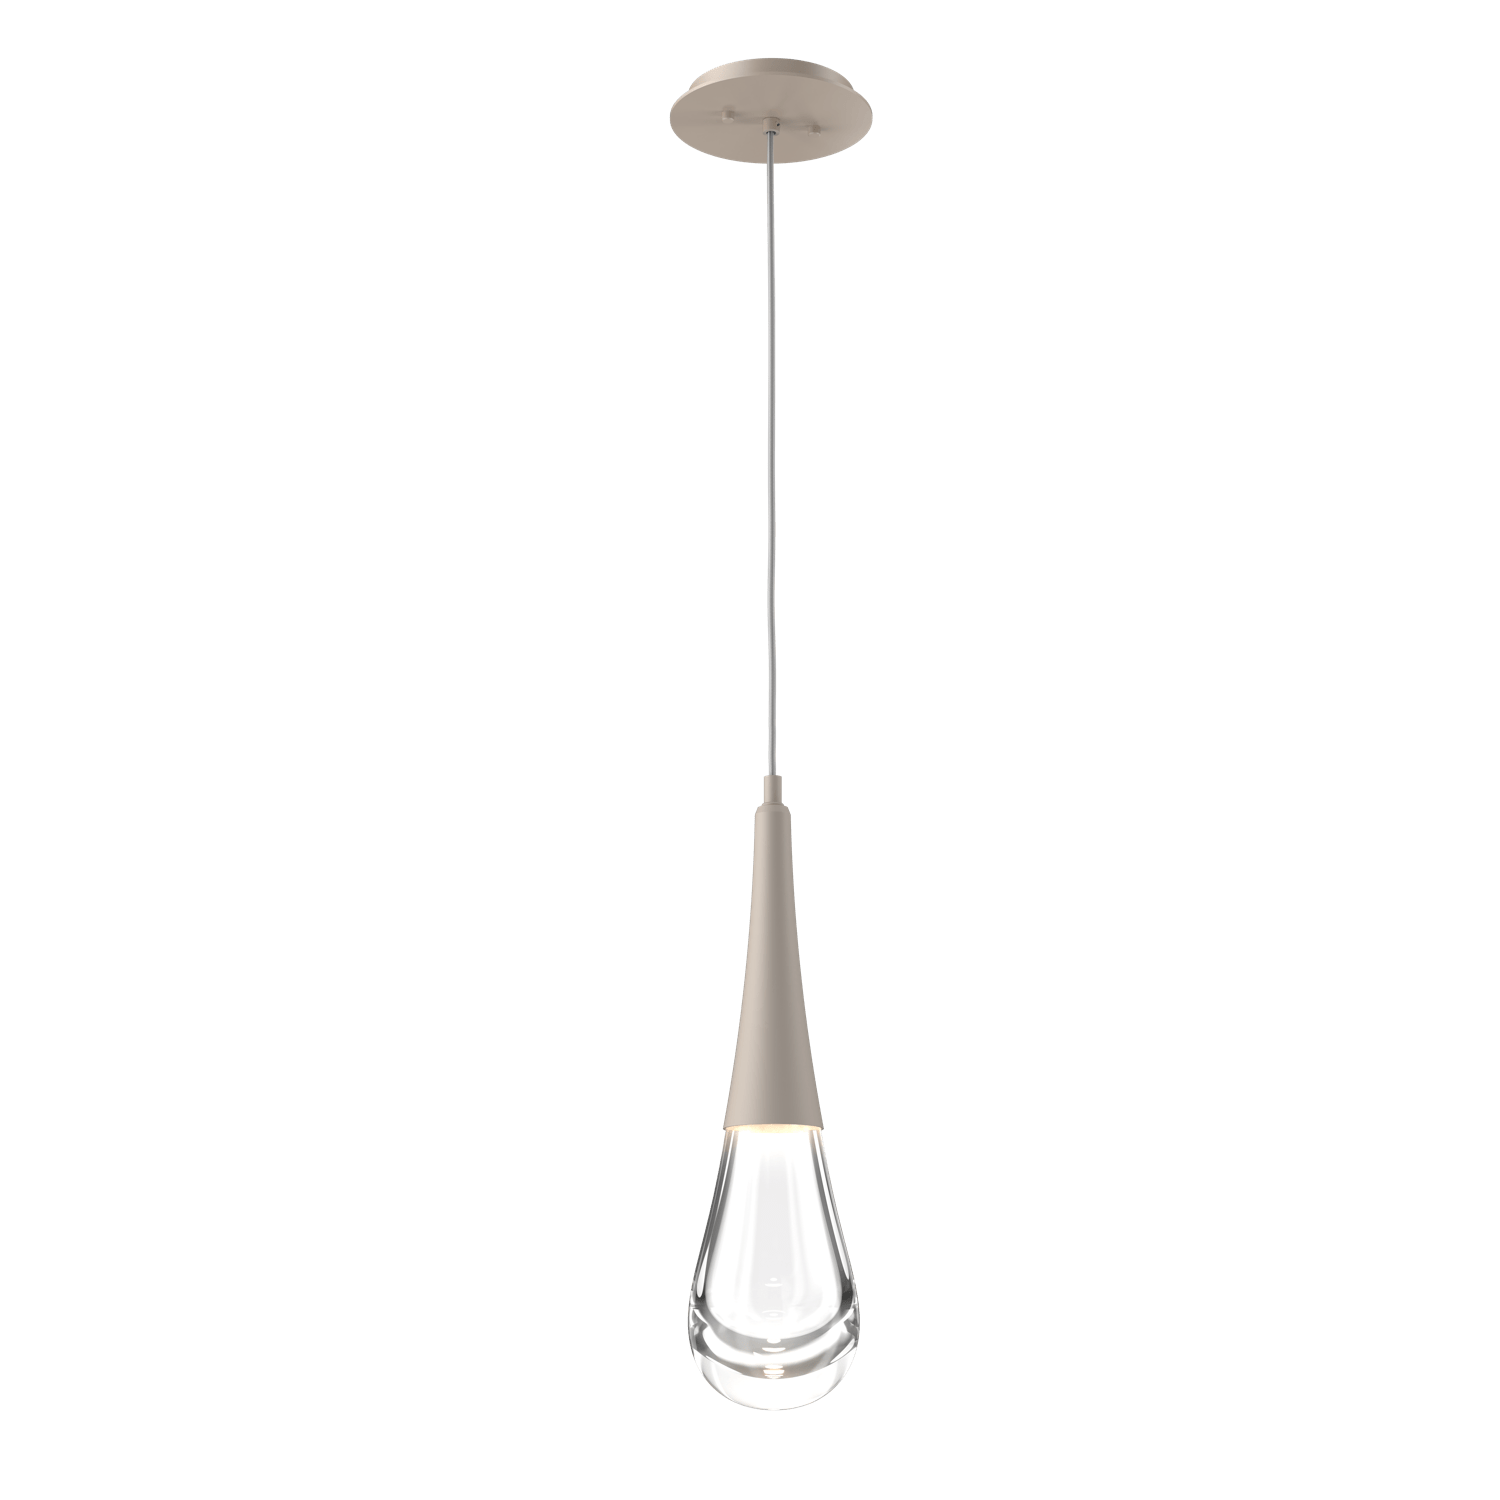 LAB0078-01-BS-Hammerton-Studio-Raindrop-pendant-light-with-metallic-beige-silver-finish-and-clear-blown-glass-shades-and-LED-lamping